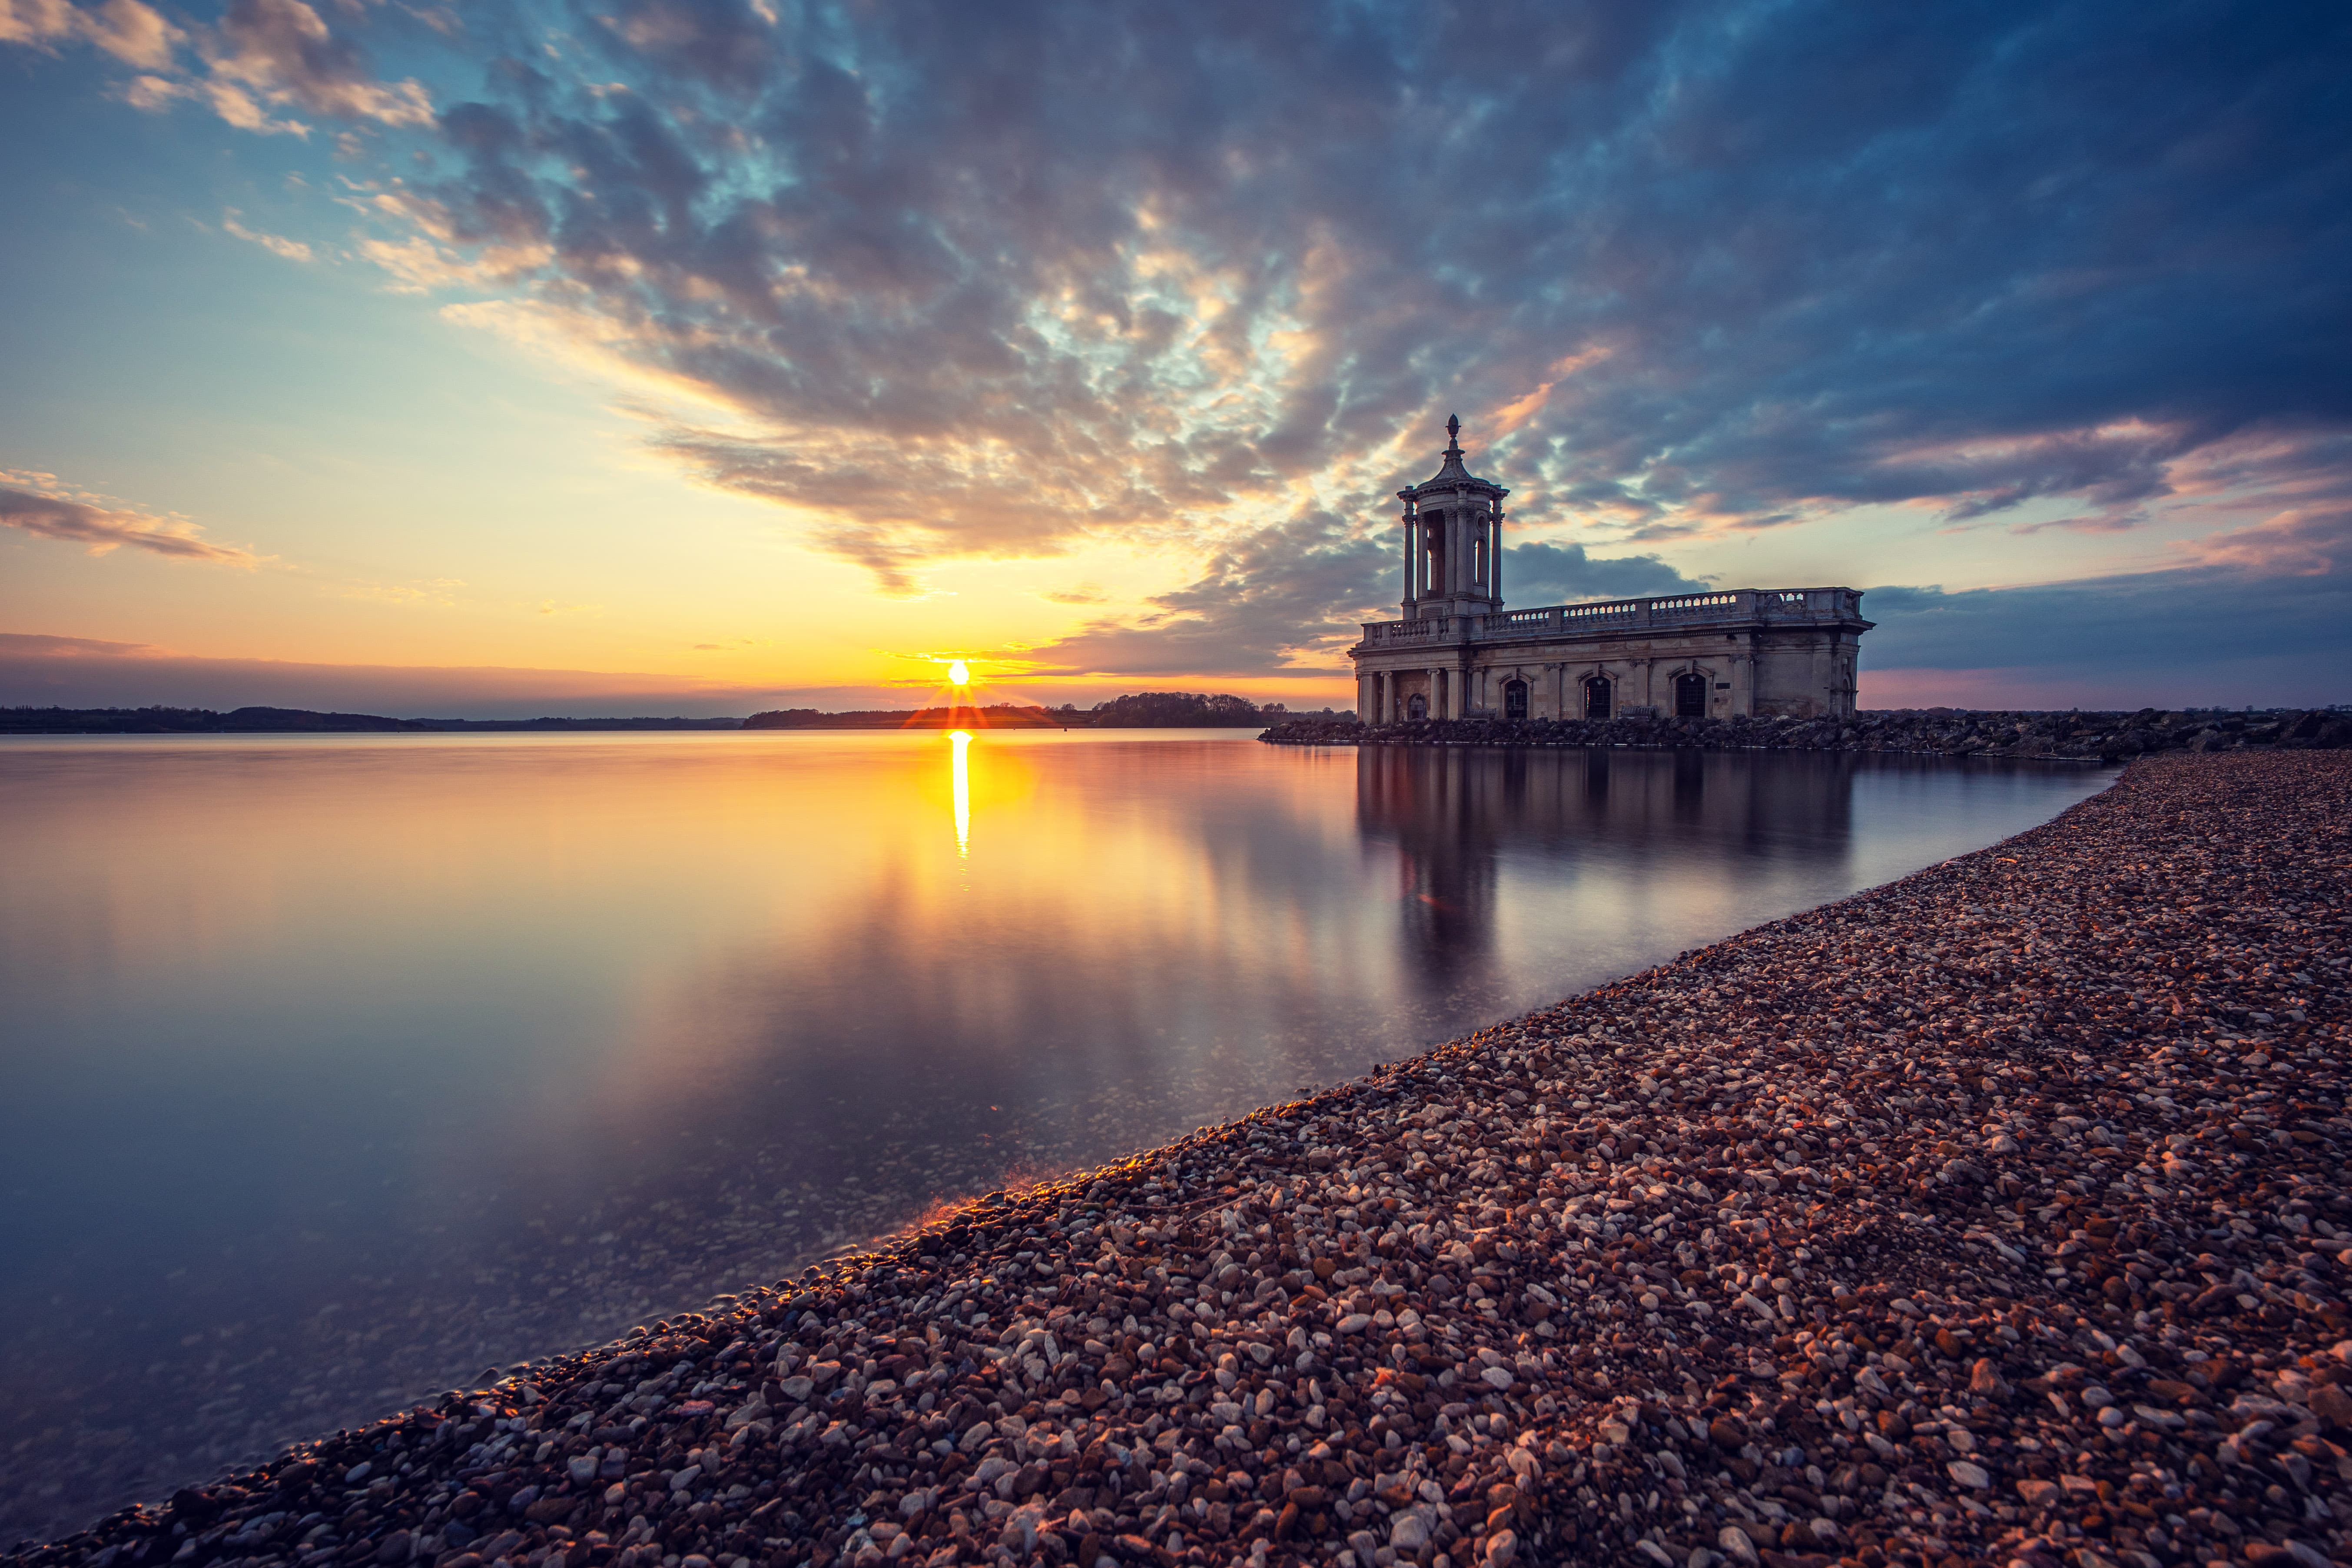 Colourful sunset with wispy clouds mirrored on a lake. A pebbly shore leads the eye to an interesting old building.